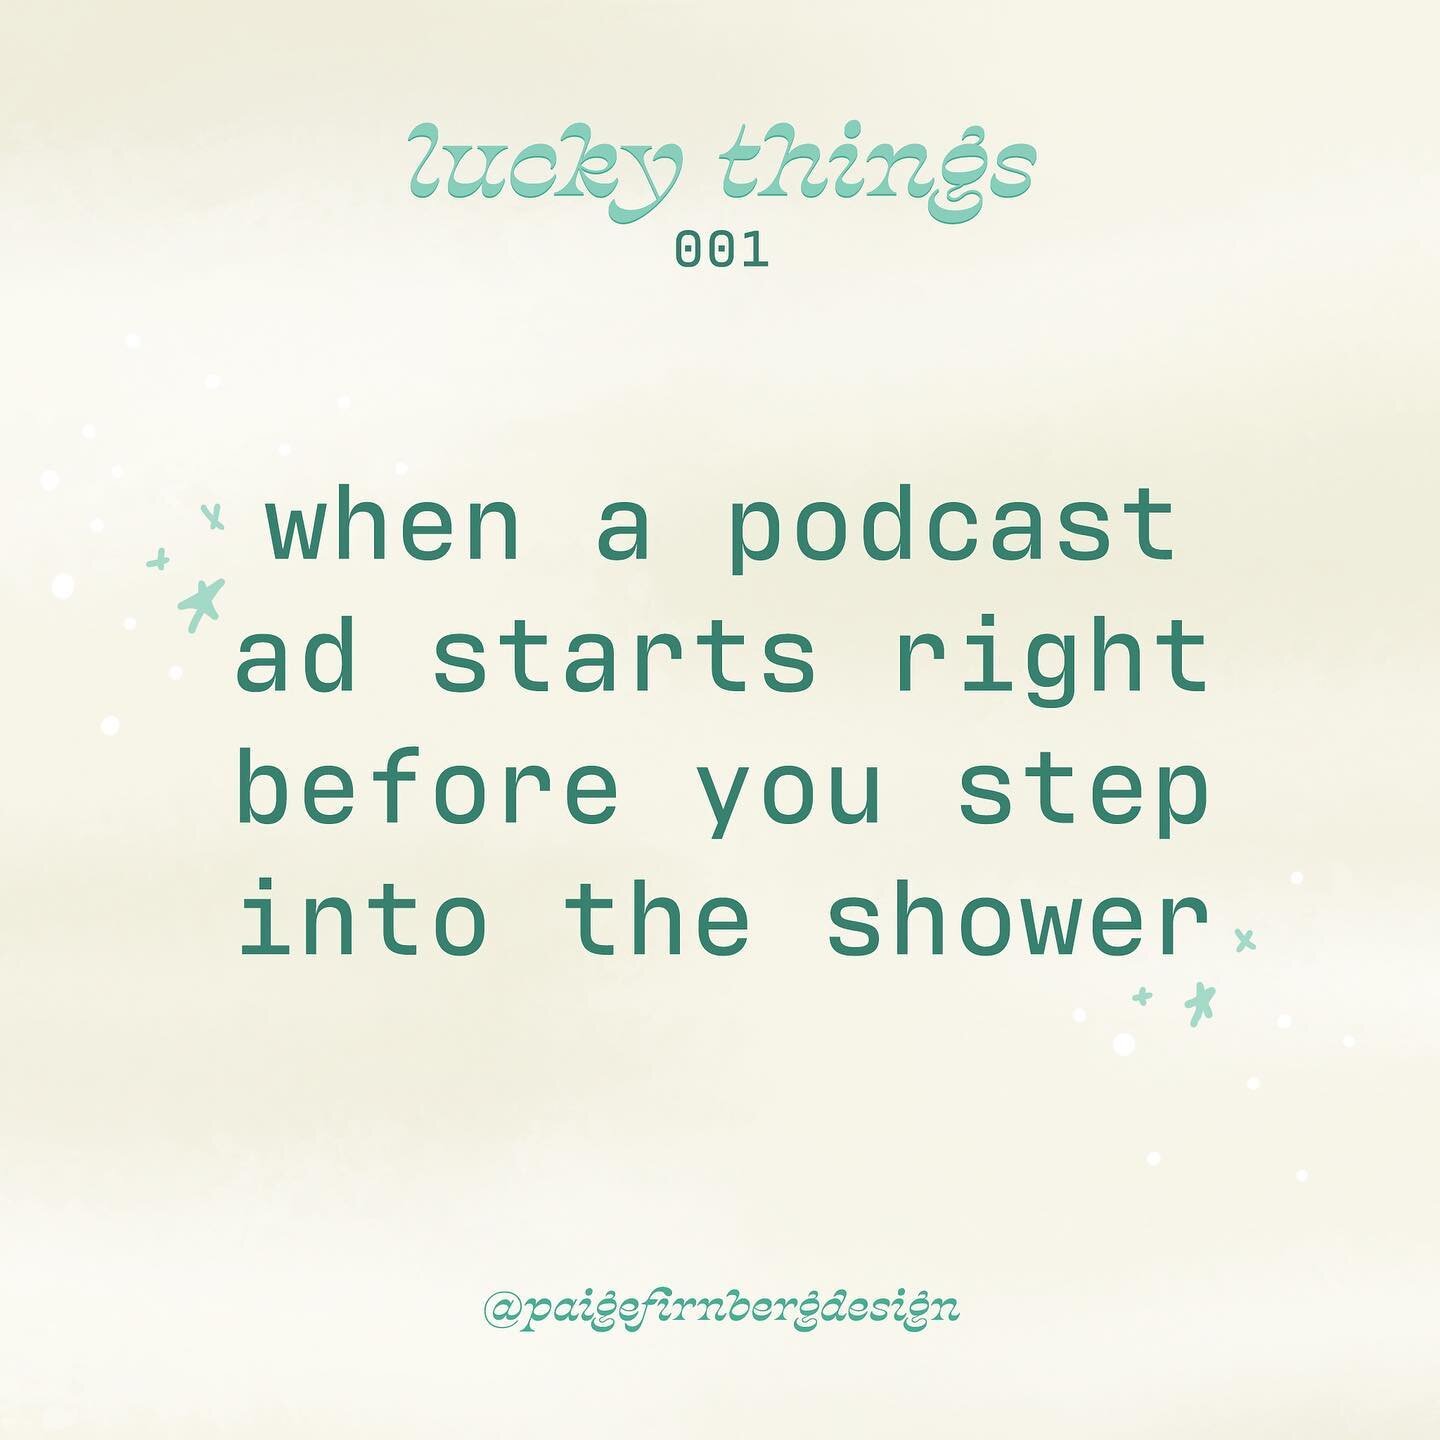 And on the flip side...you feel like you&rsquo;ve been cursed when you start shampooing your hair and have to *actually listen to* an ad. Or worse...THREE.  Anyone else feel me?